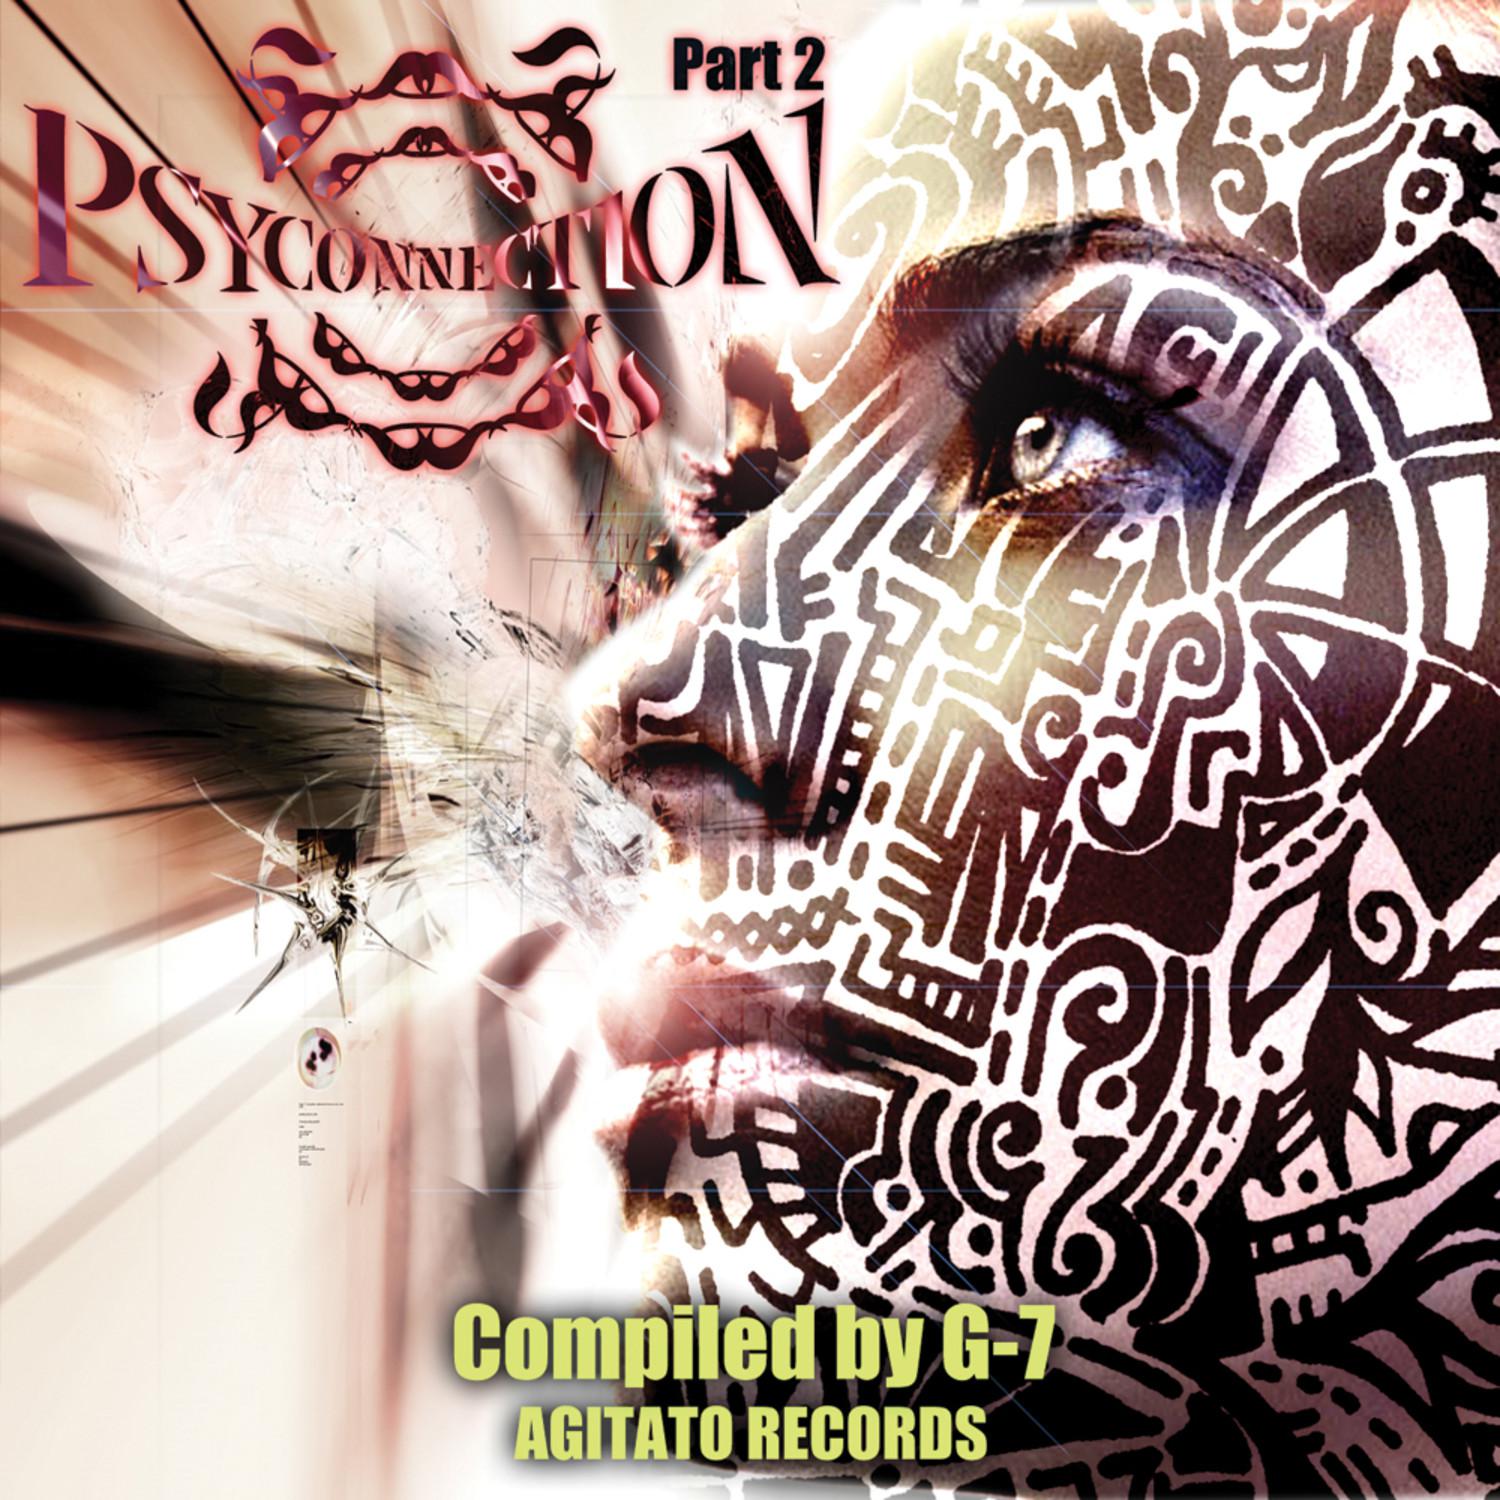 Psyconnection Part 2  compiled by G7